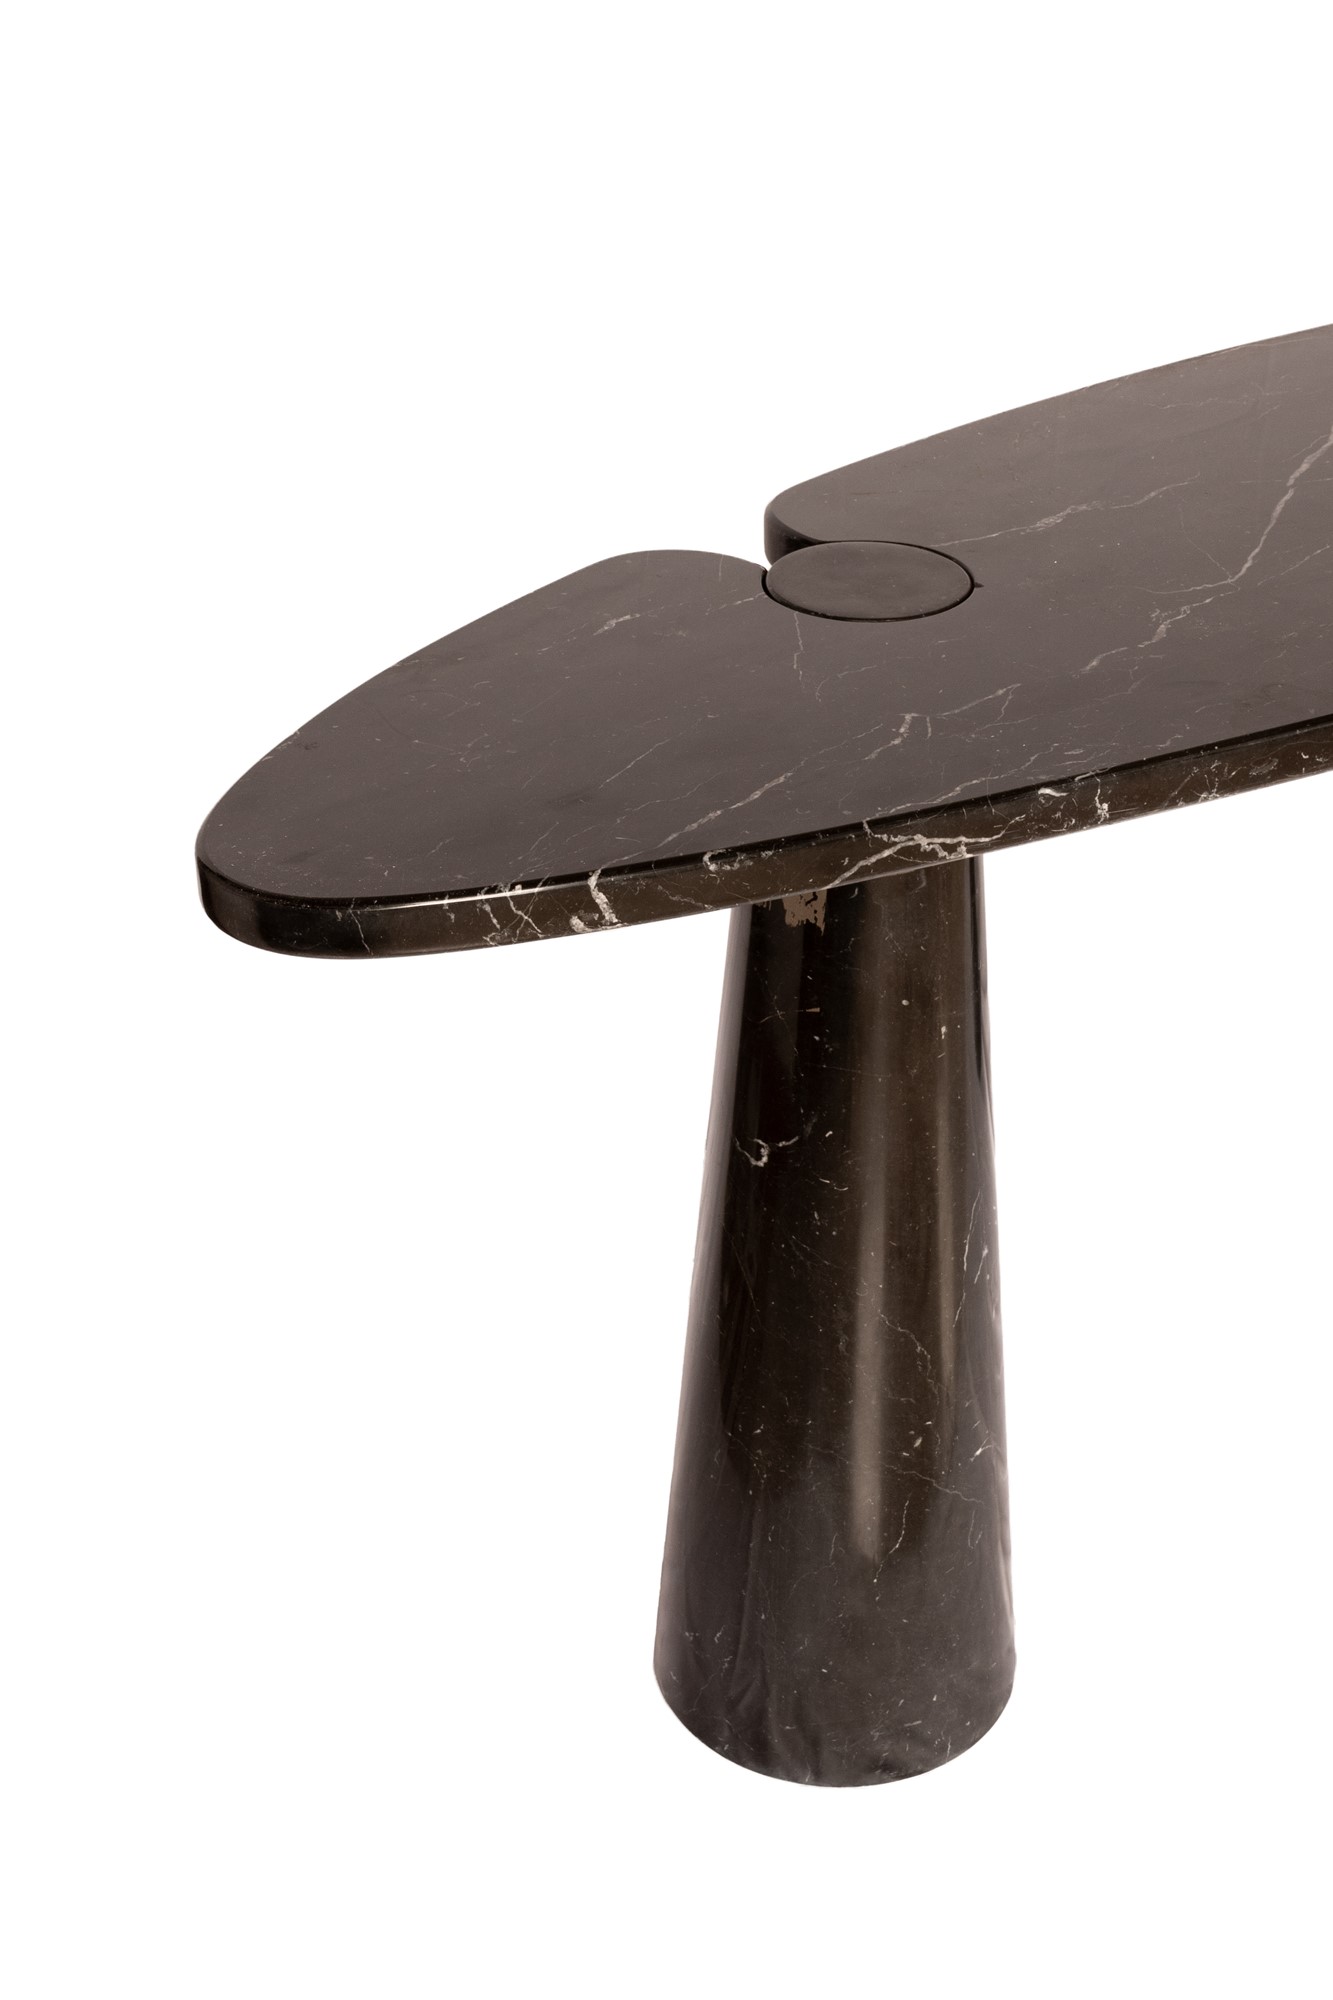 Angelo Mangiarotti Black marble console table by Marquina from the Eros series - Image 22 of 27